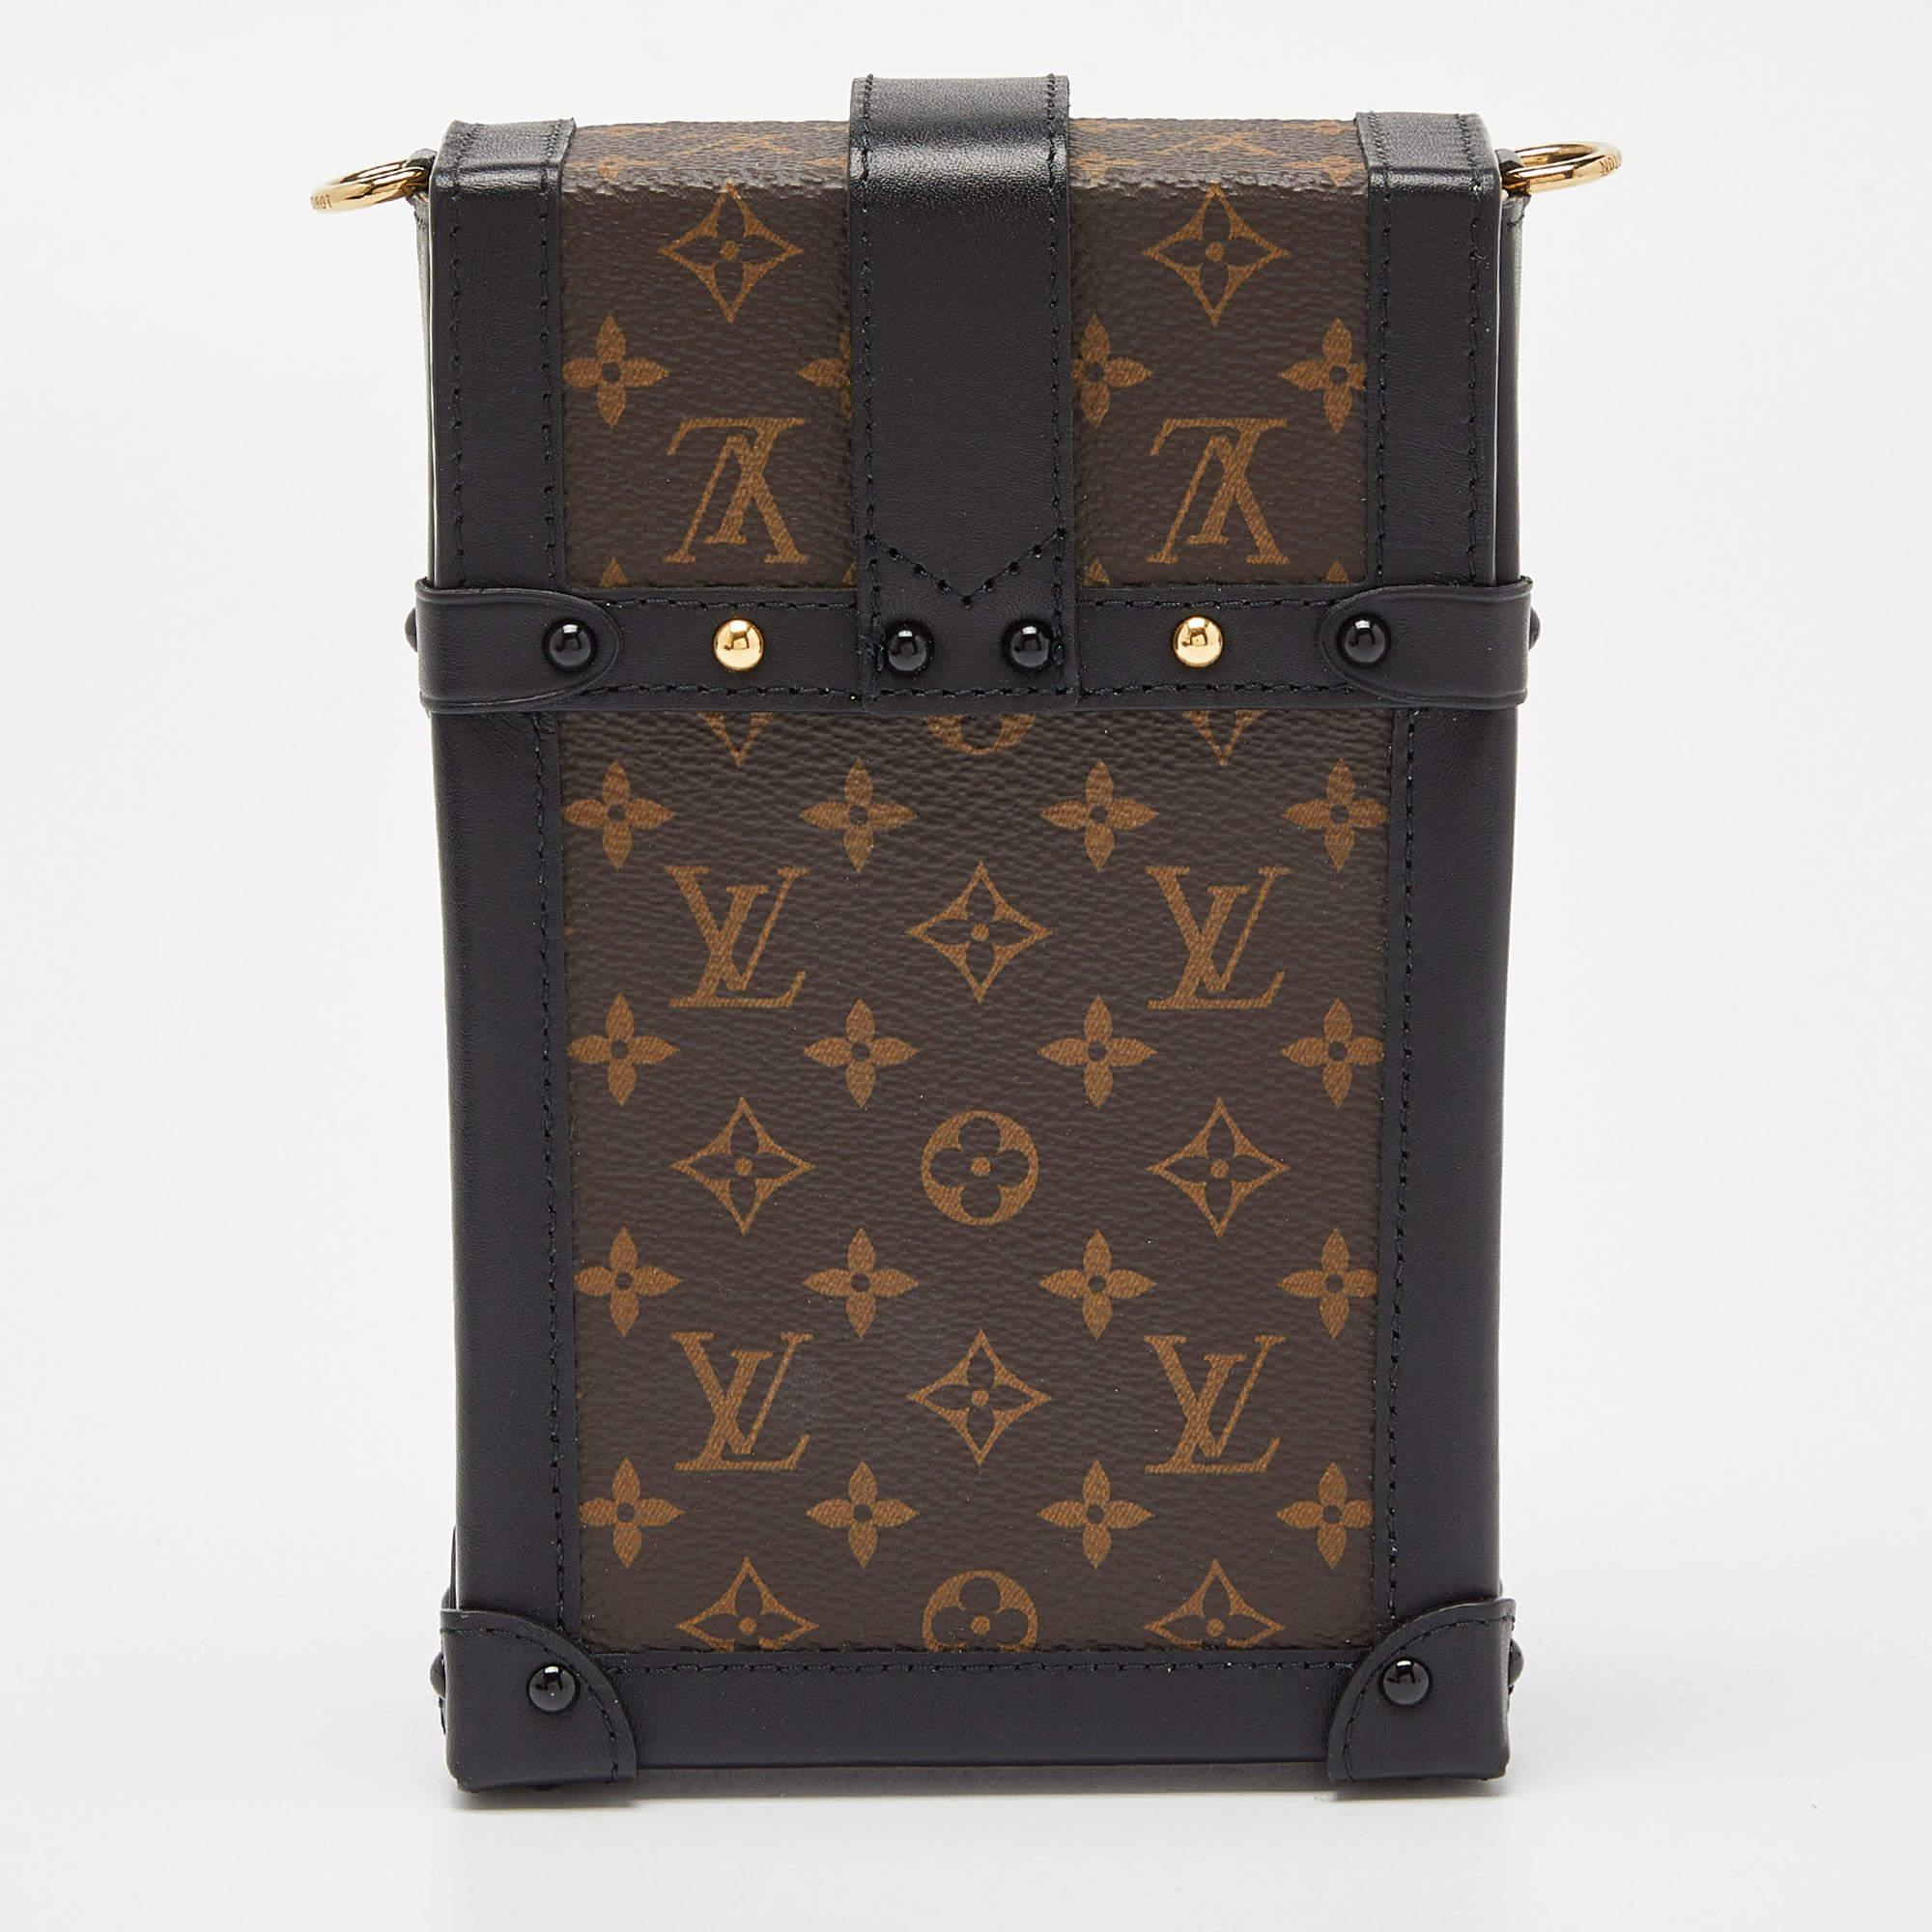 Louis Vuitton's Pochette Trunk vertical bag is made of Monogram canvas and leather. It is complemented by gold-tone hardware and held by a shoulder strap.

